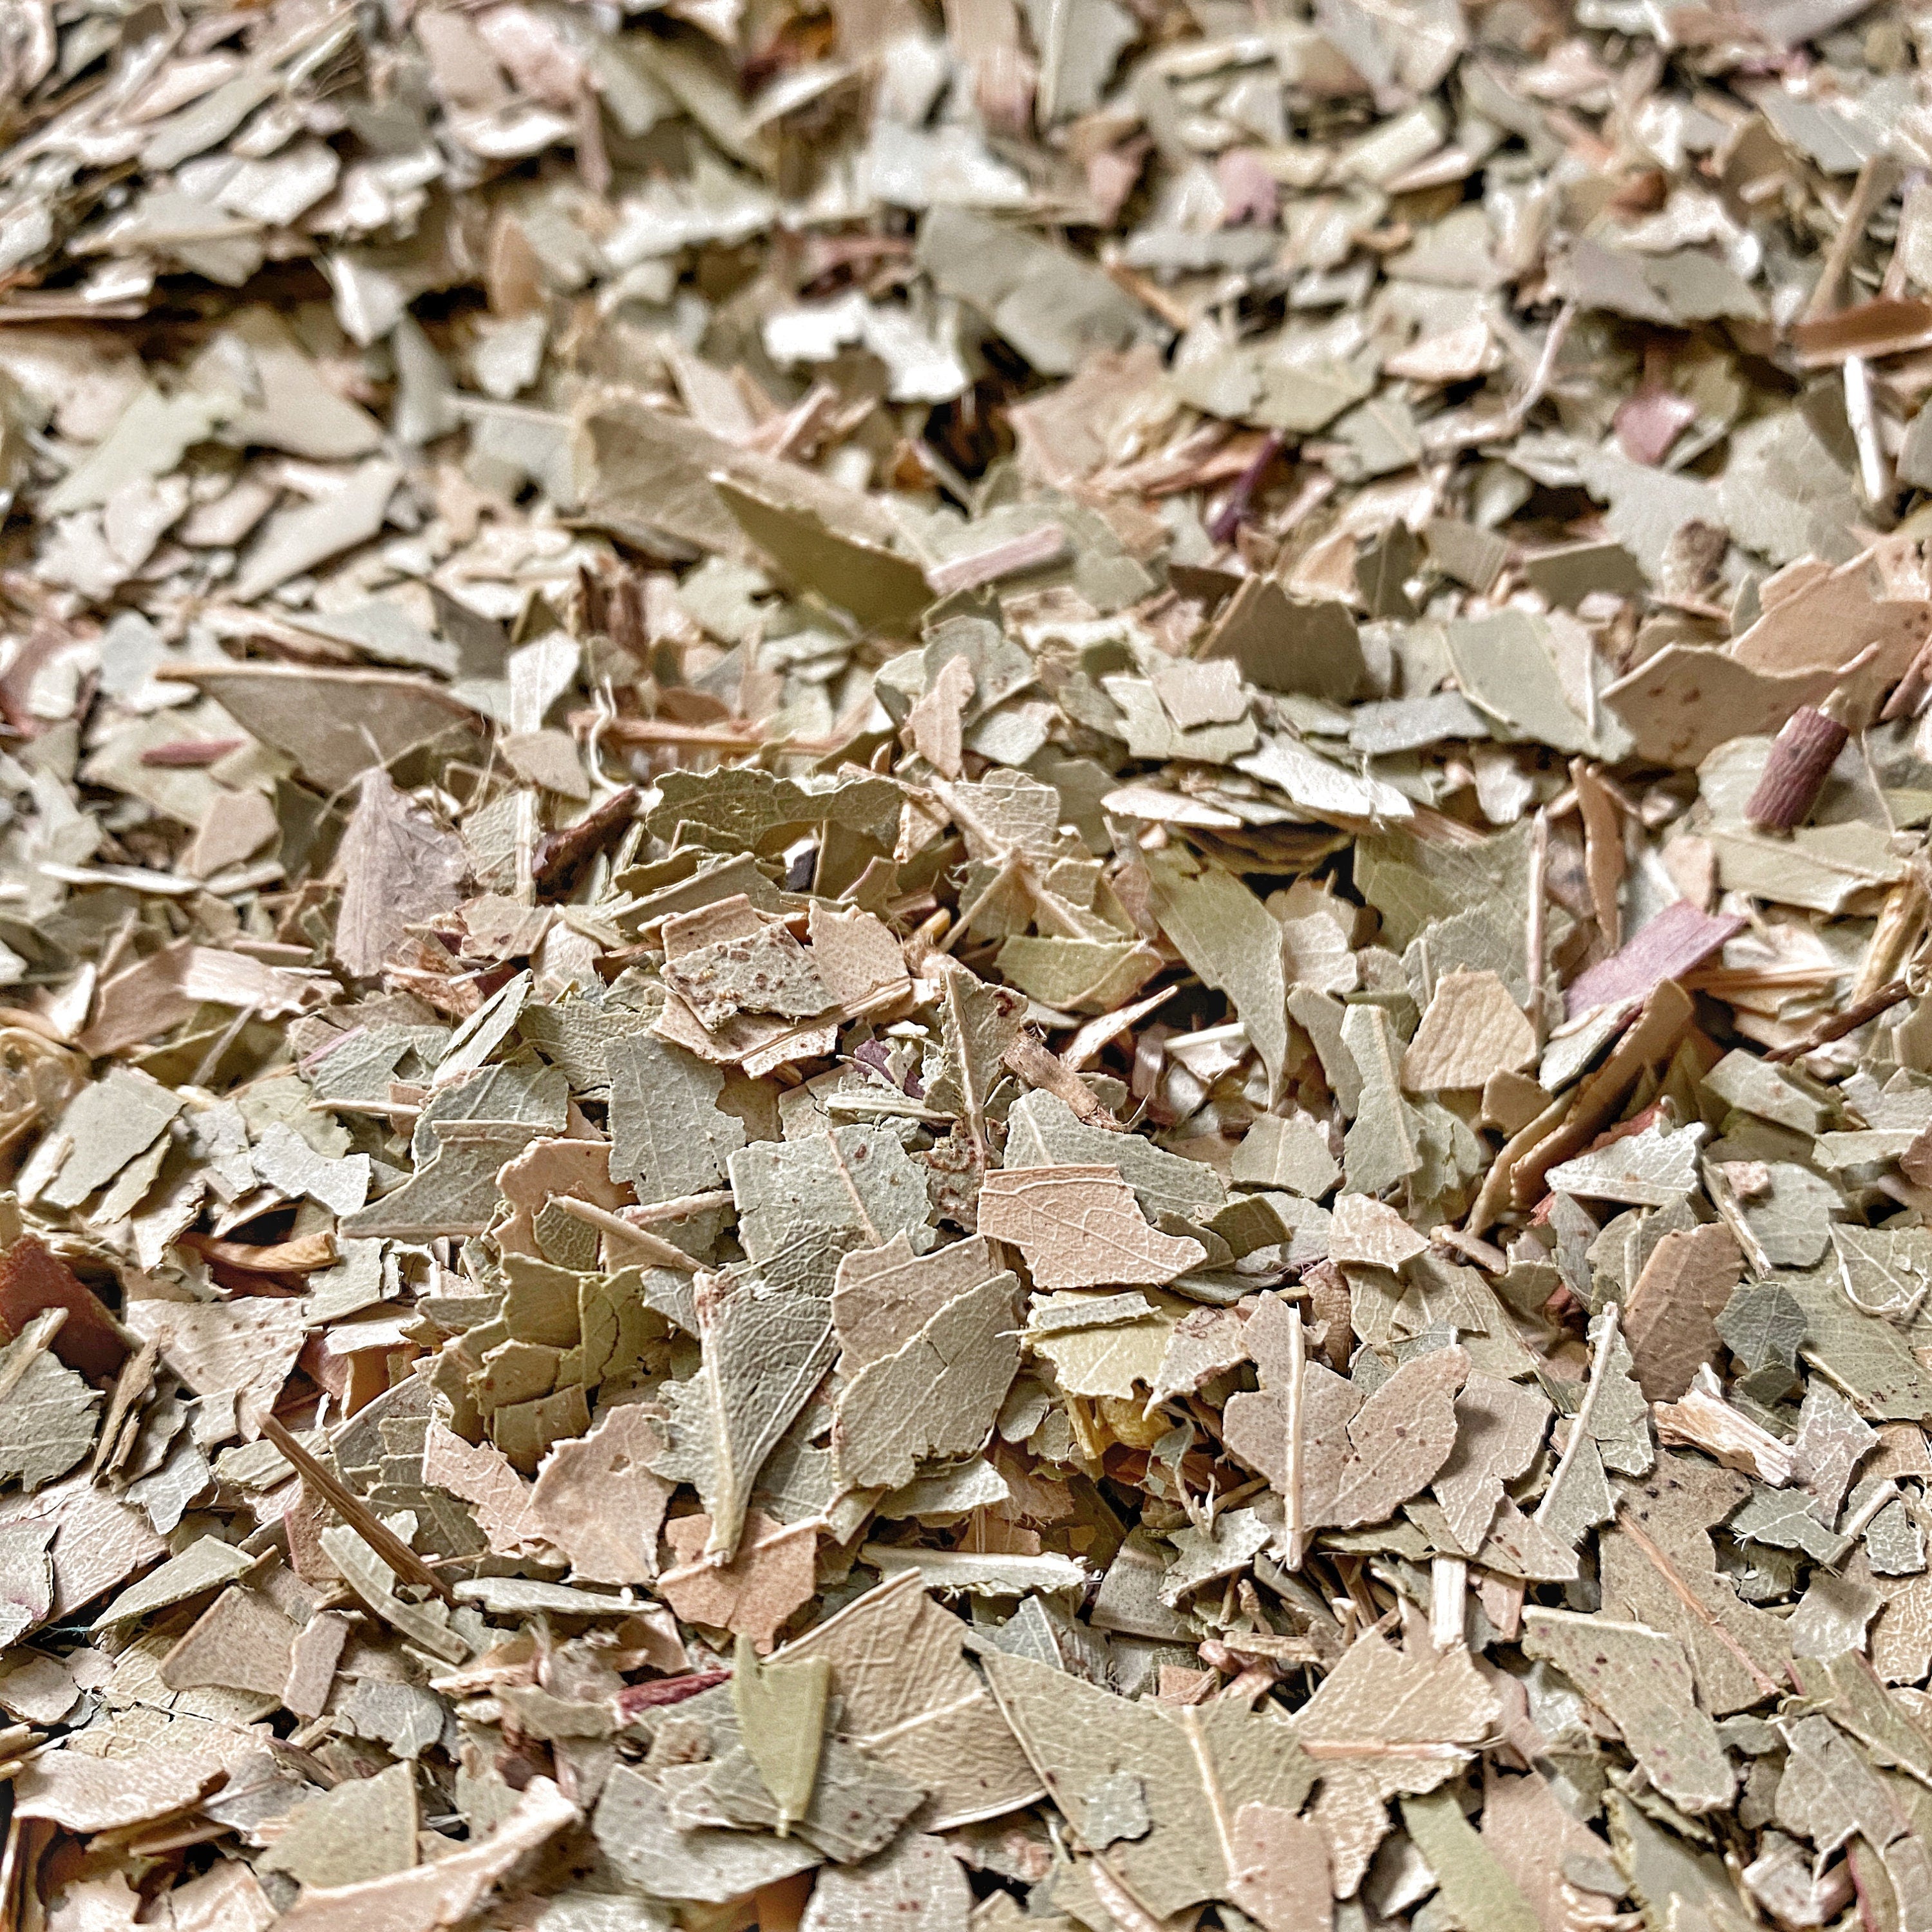 A close view of cut and sifted eucalyptus leaves, with detailed texture and color variation, suitable for herbal uses